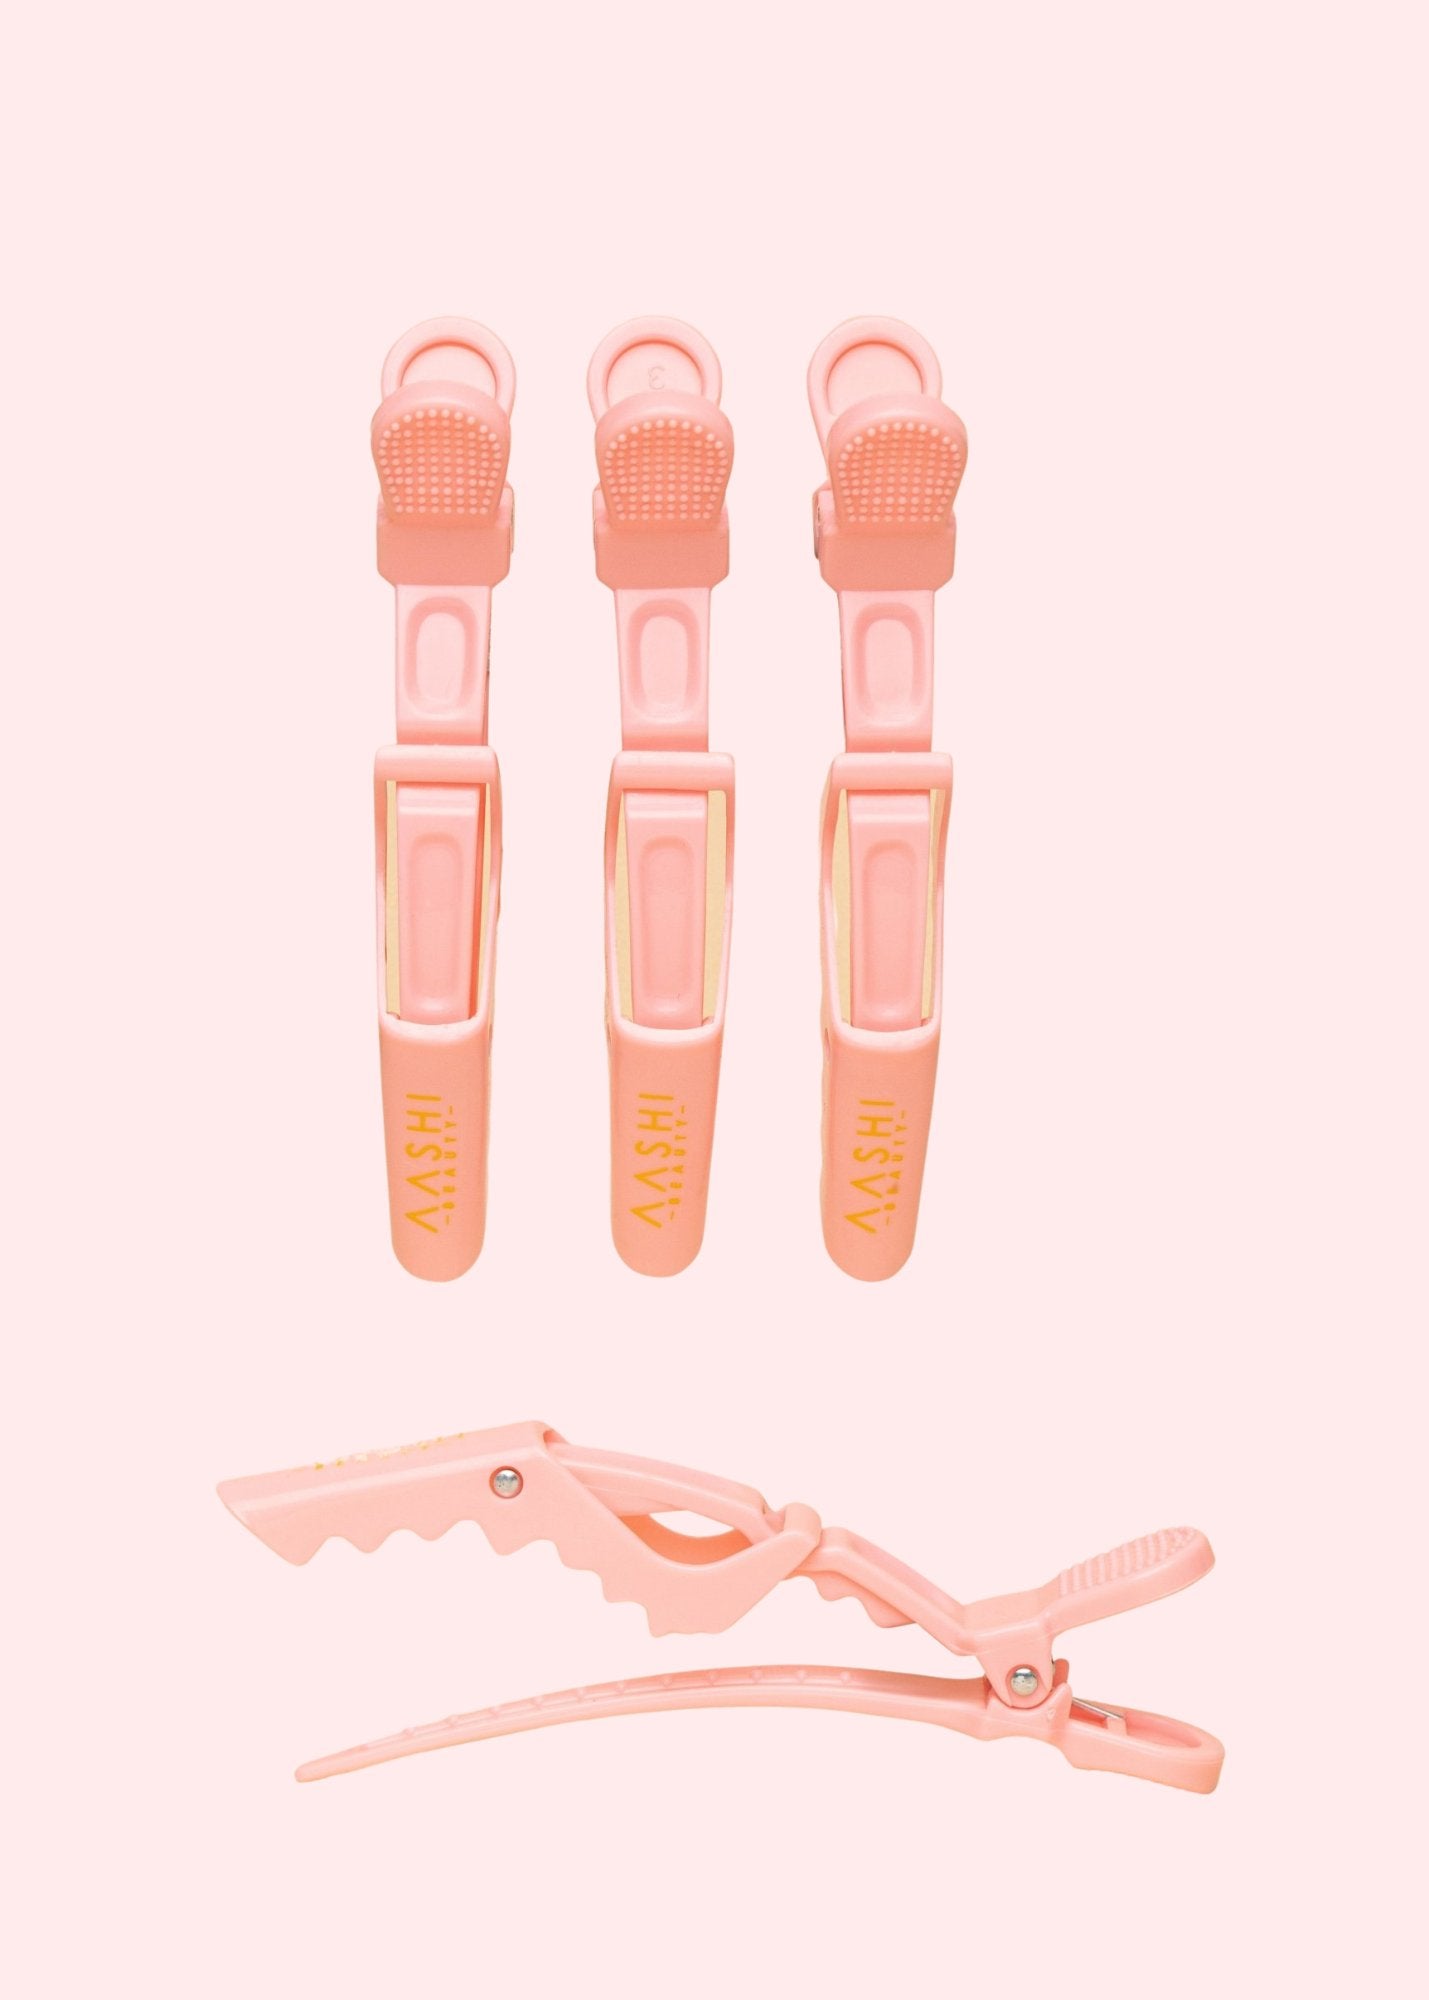 Aashi Beauty Girly Pink Claw Clips, Pack of 4 (Pre-Order) - Aashi Beauty